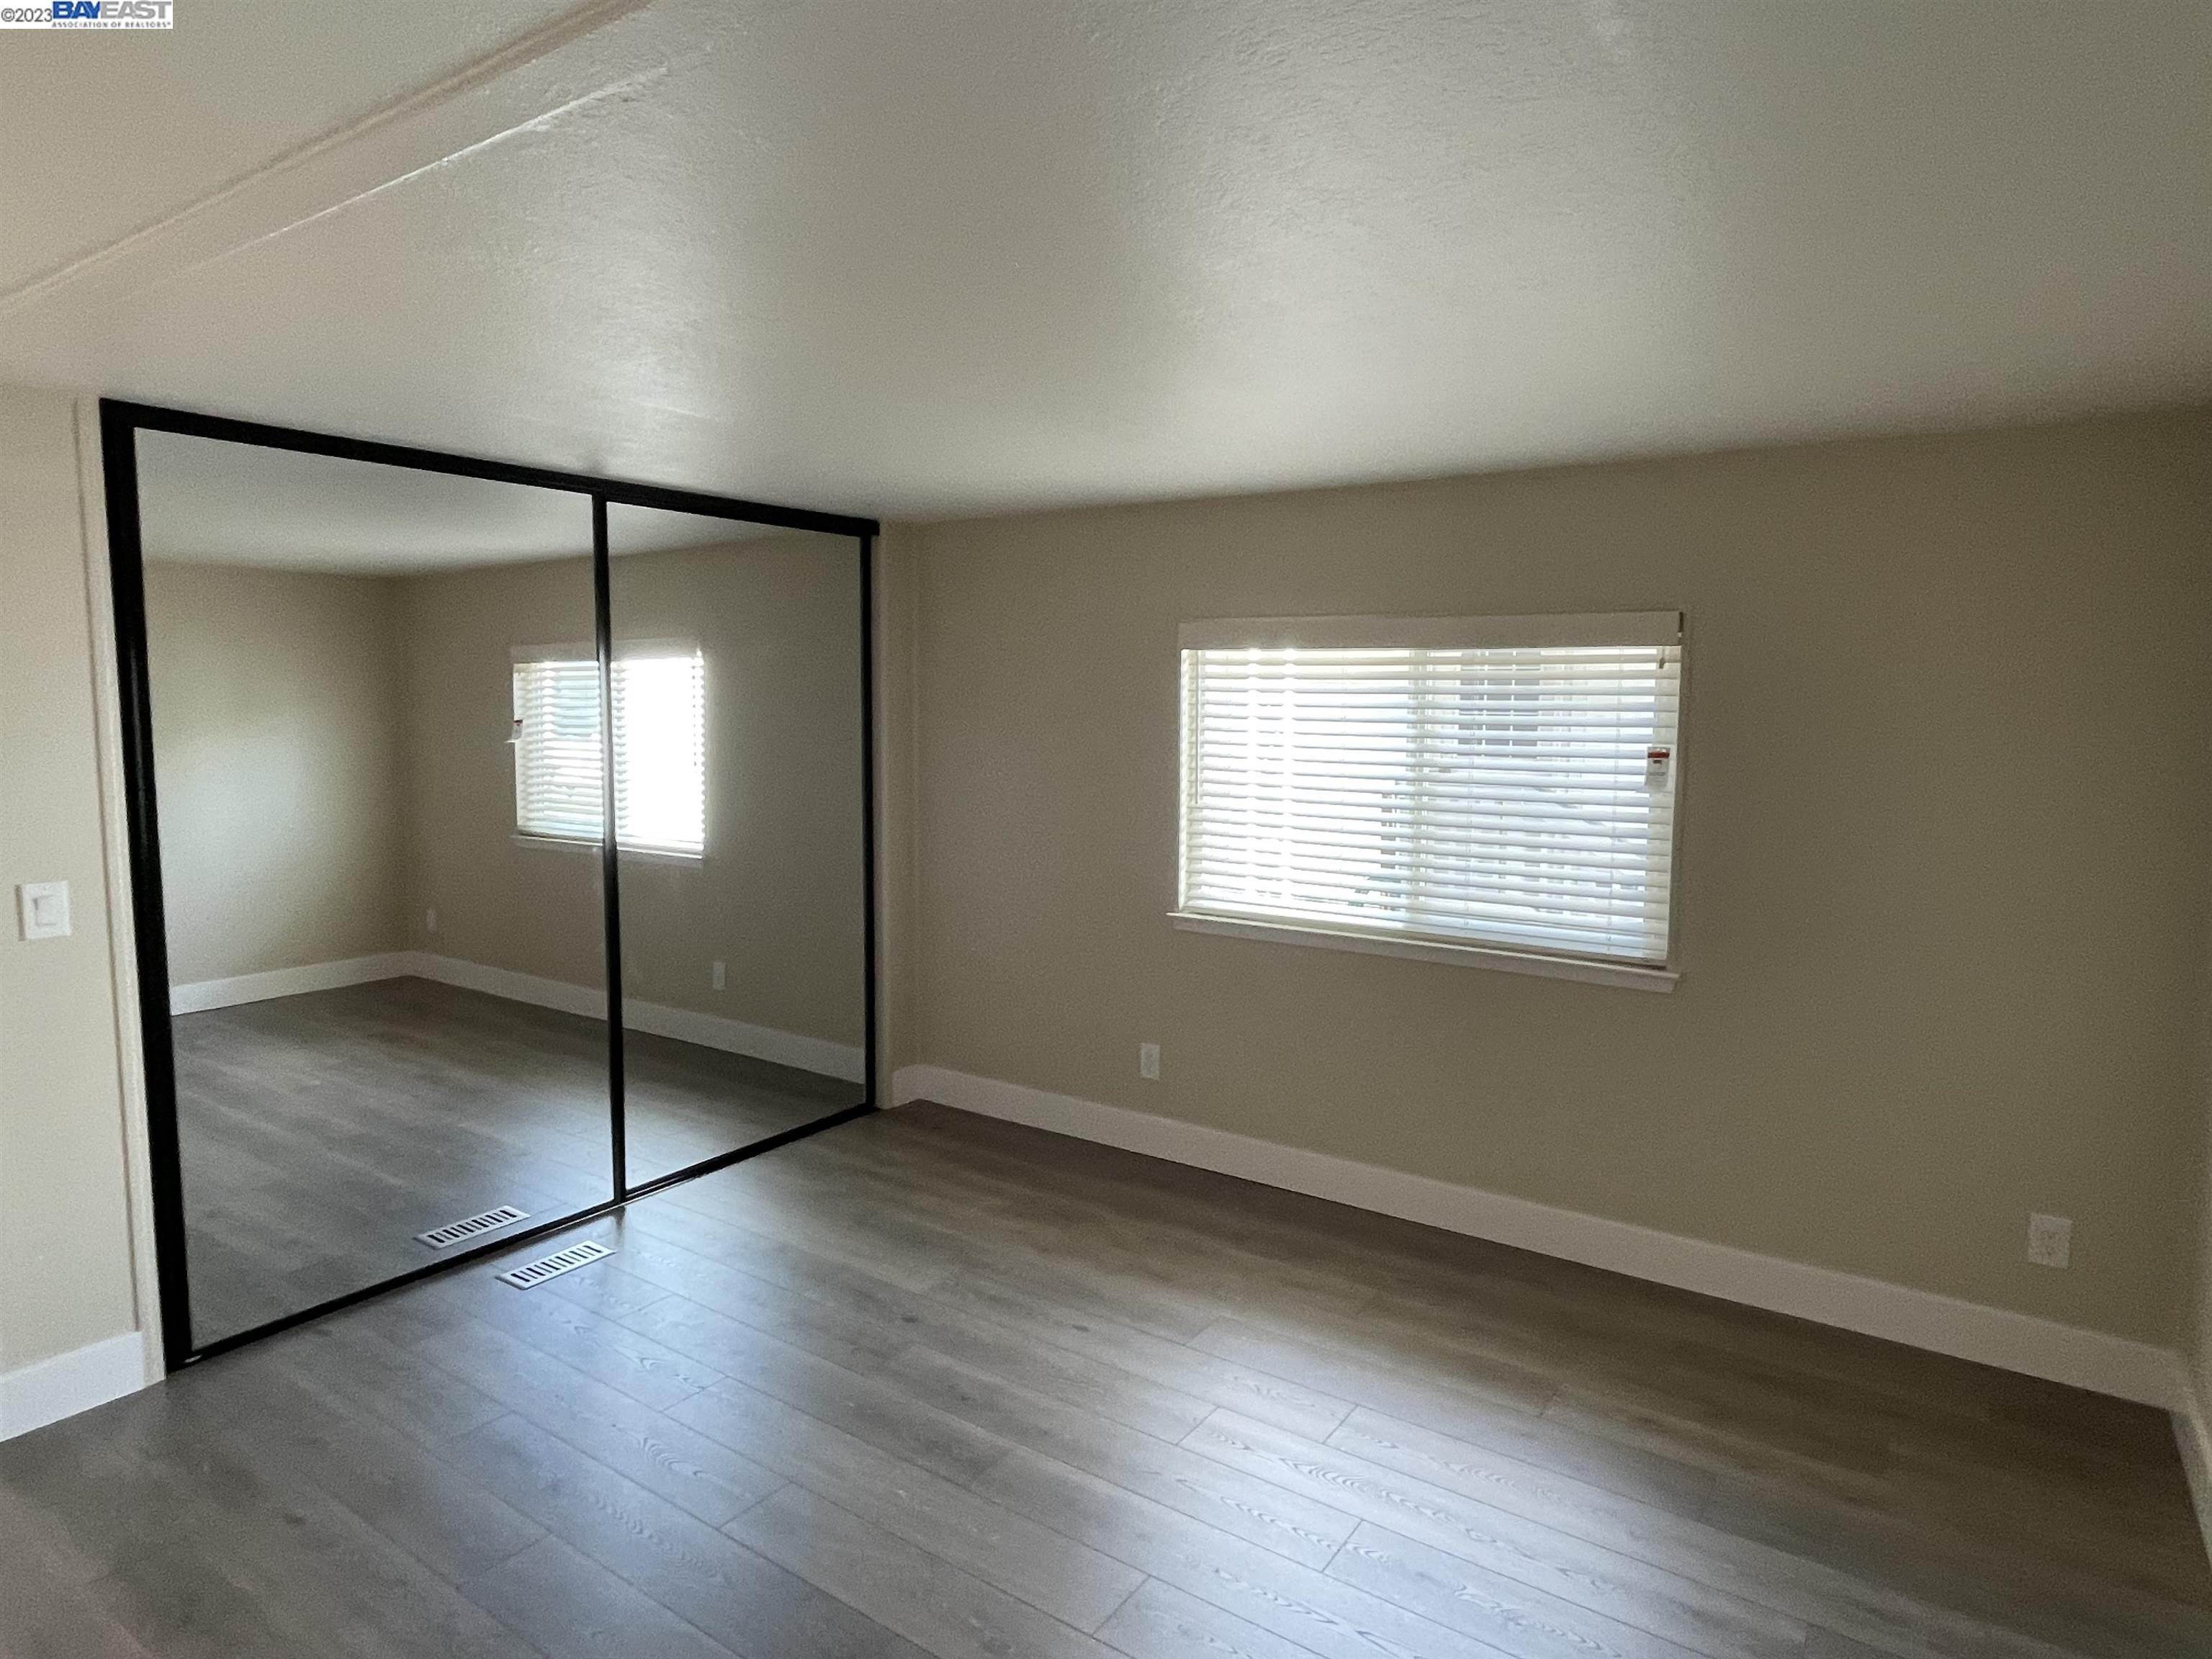 30. Mobile Home for Sale at Hayward, CA 94545